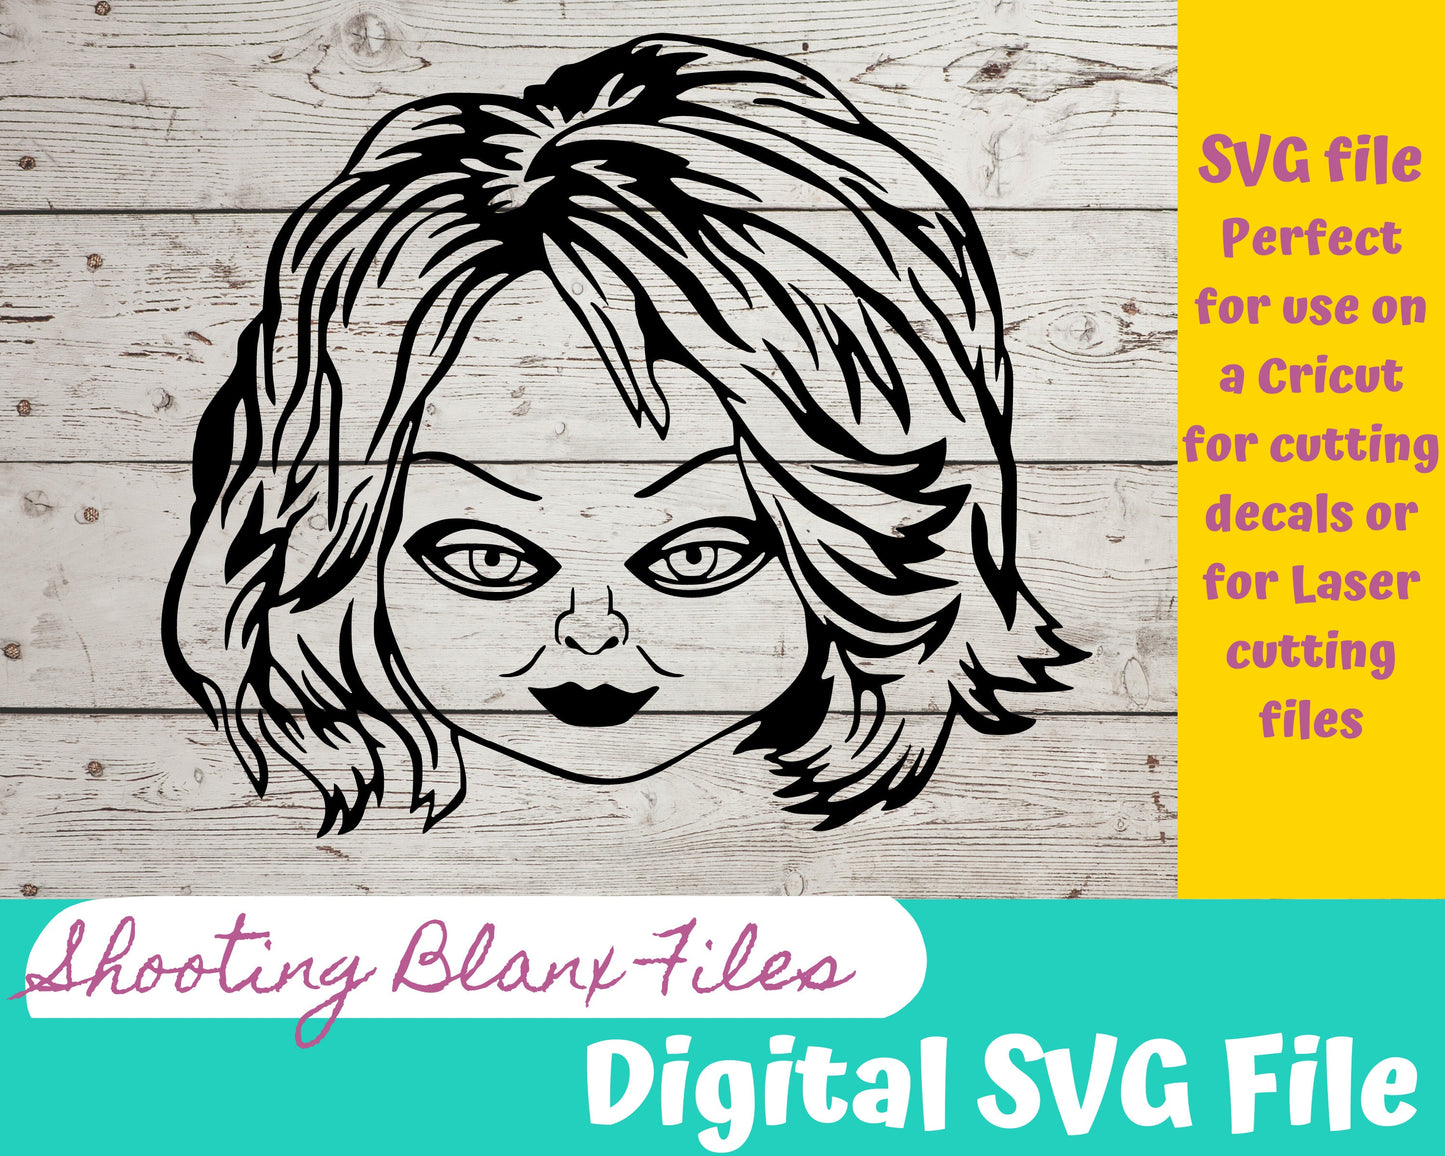 Bride of a evil doll SVG file perfect for Cricut, Cameo, or Silhouette also for laser engraving Glowforge, Scary, Halloween, Tiffany